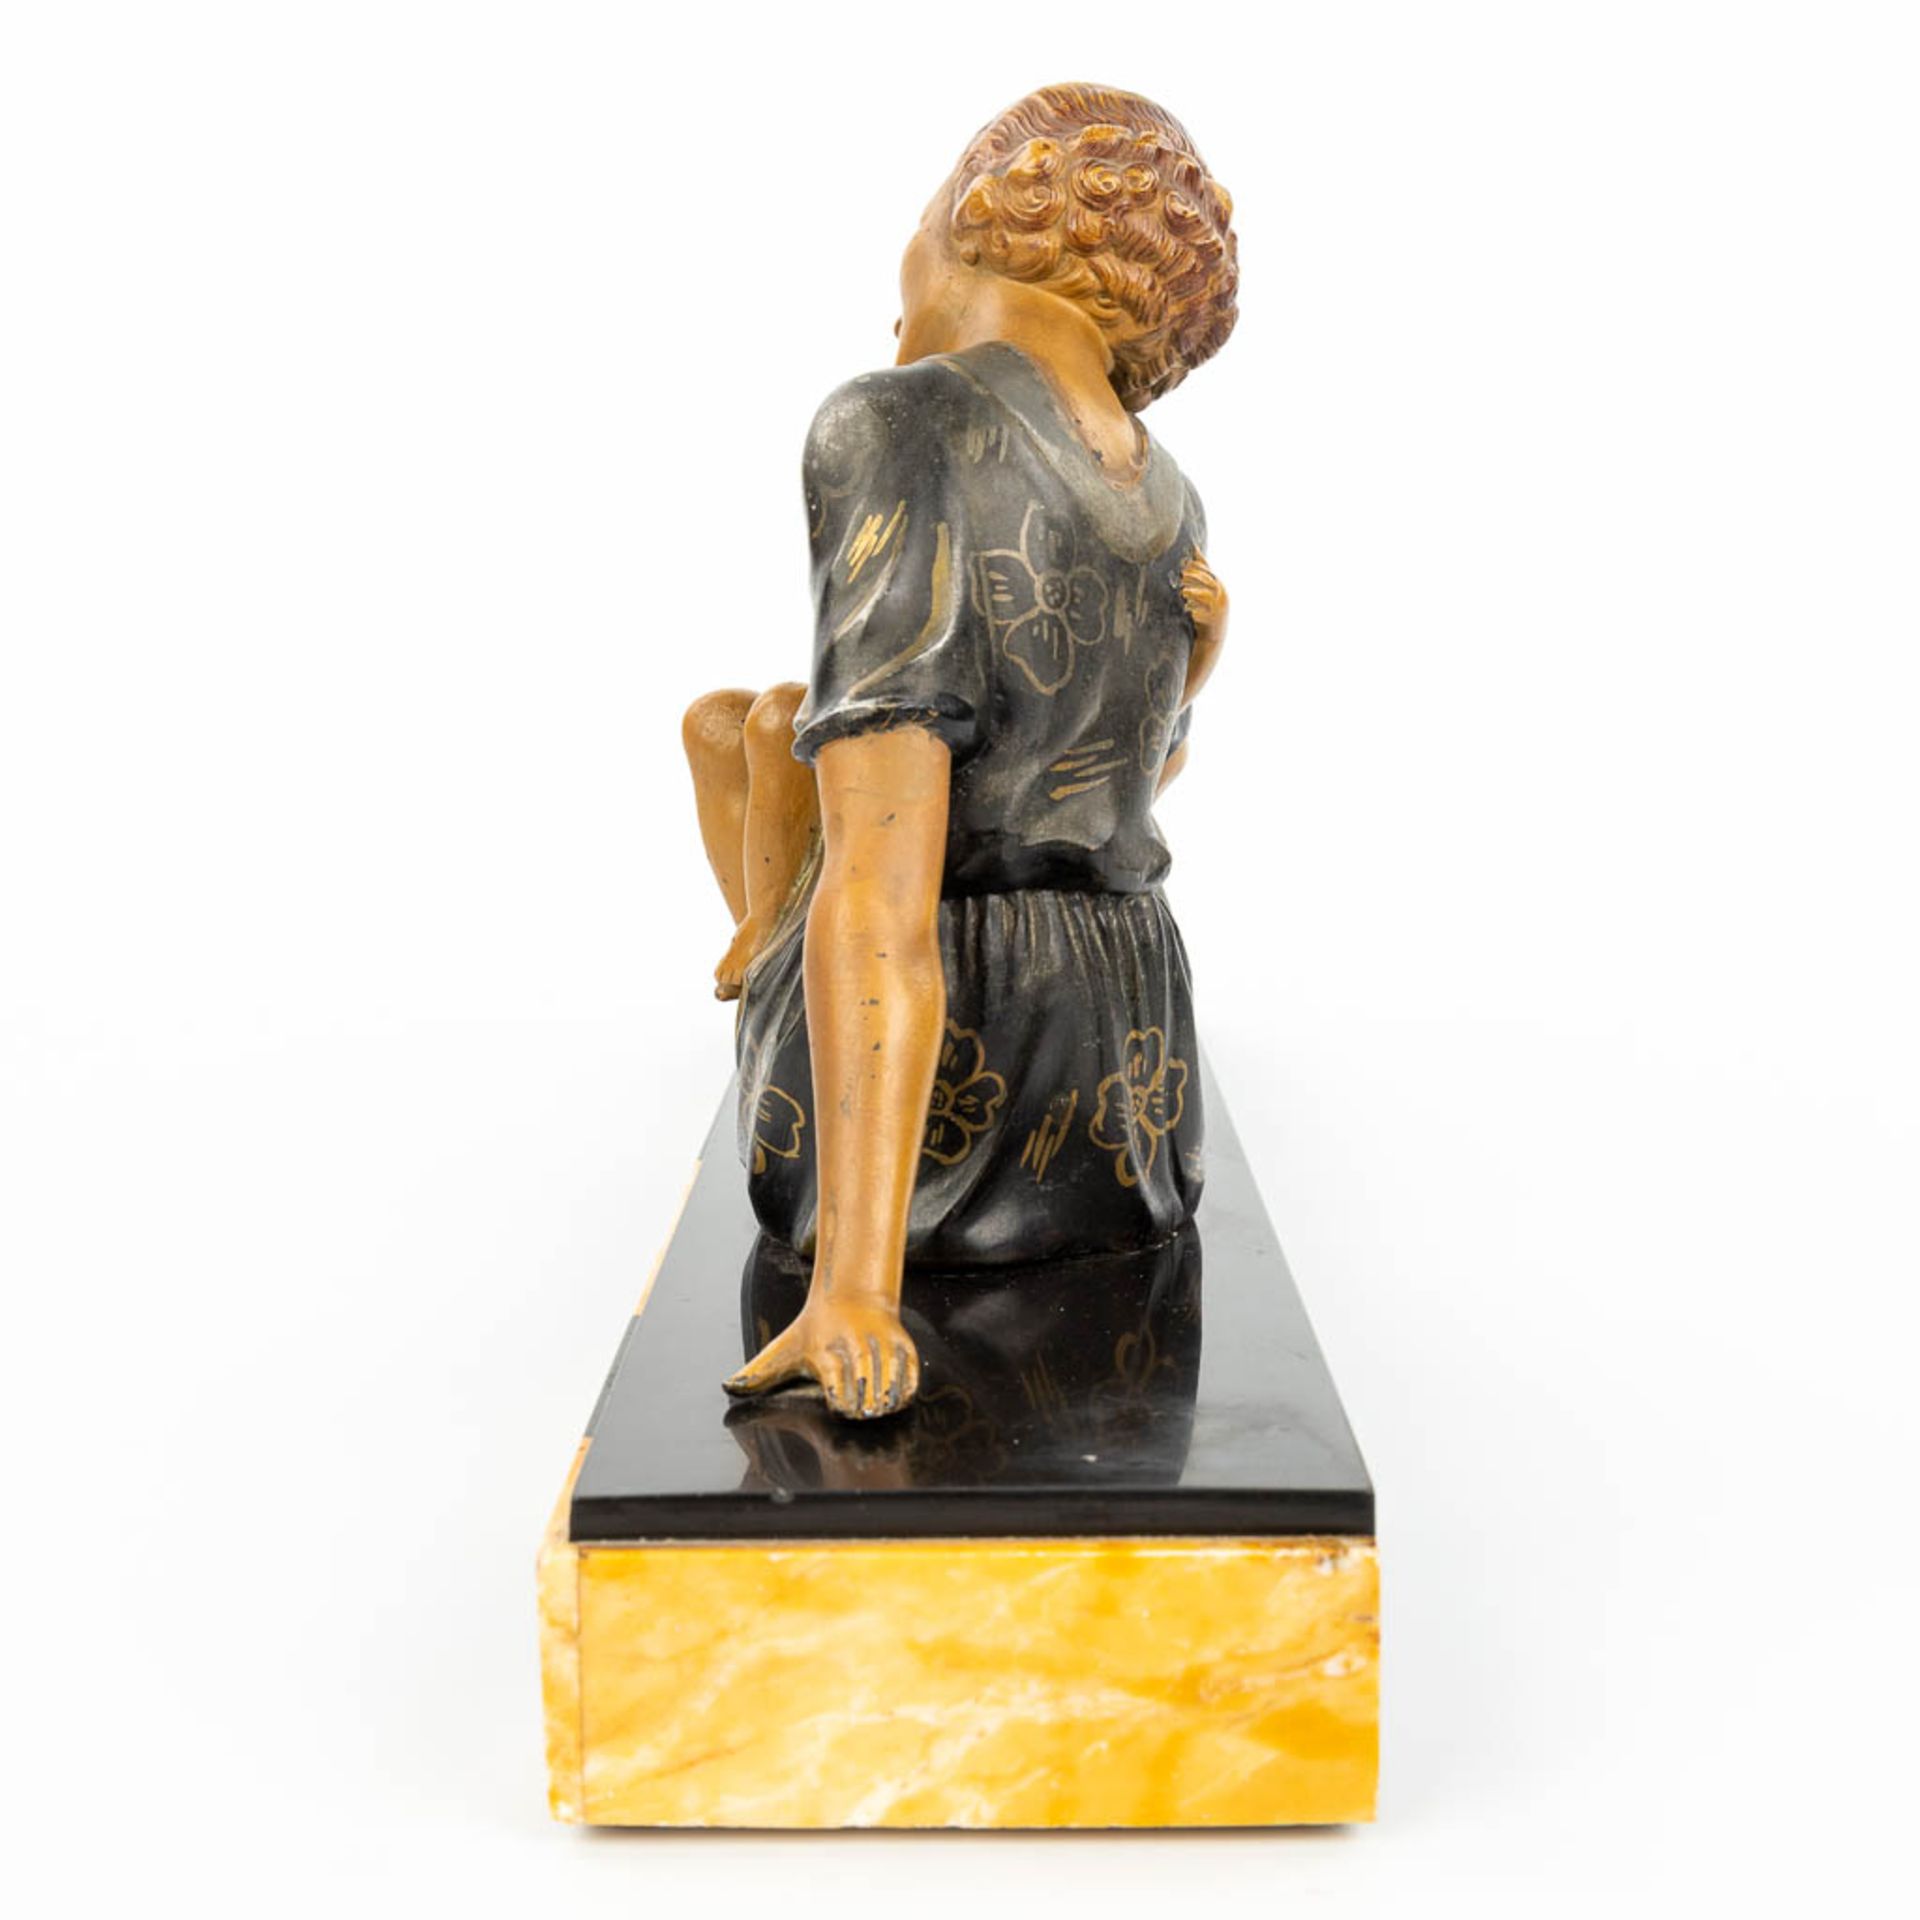 An art deco style statue of a woman with child and her dog, made of spelter and mounted on a marble - Image 10 of 12